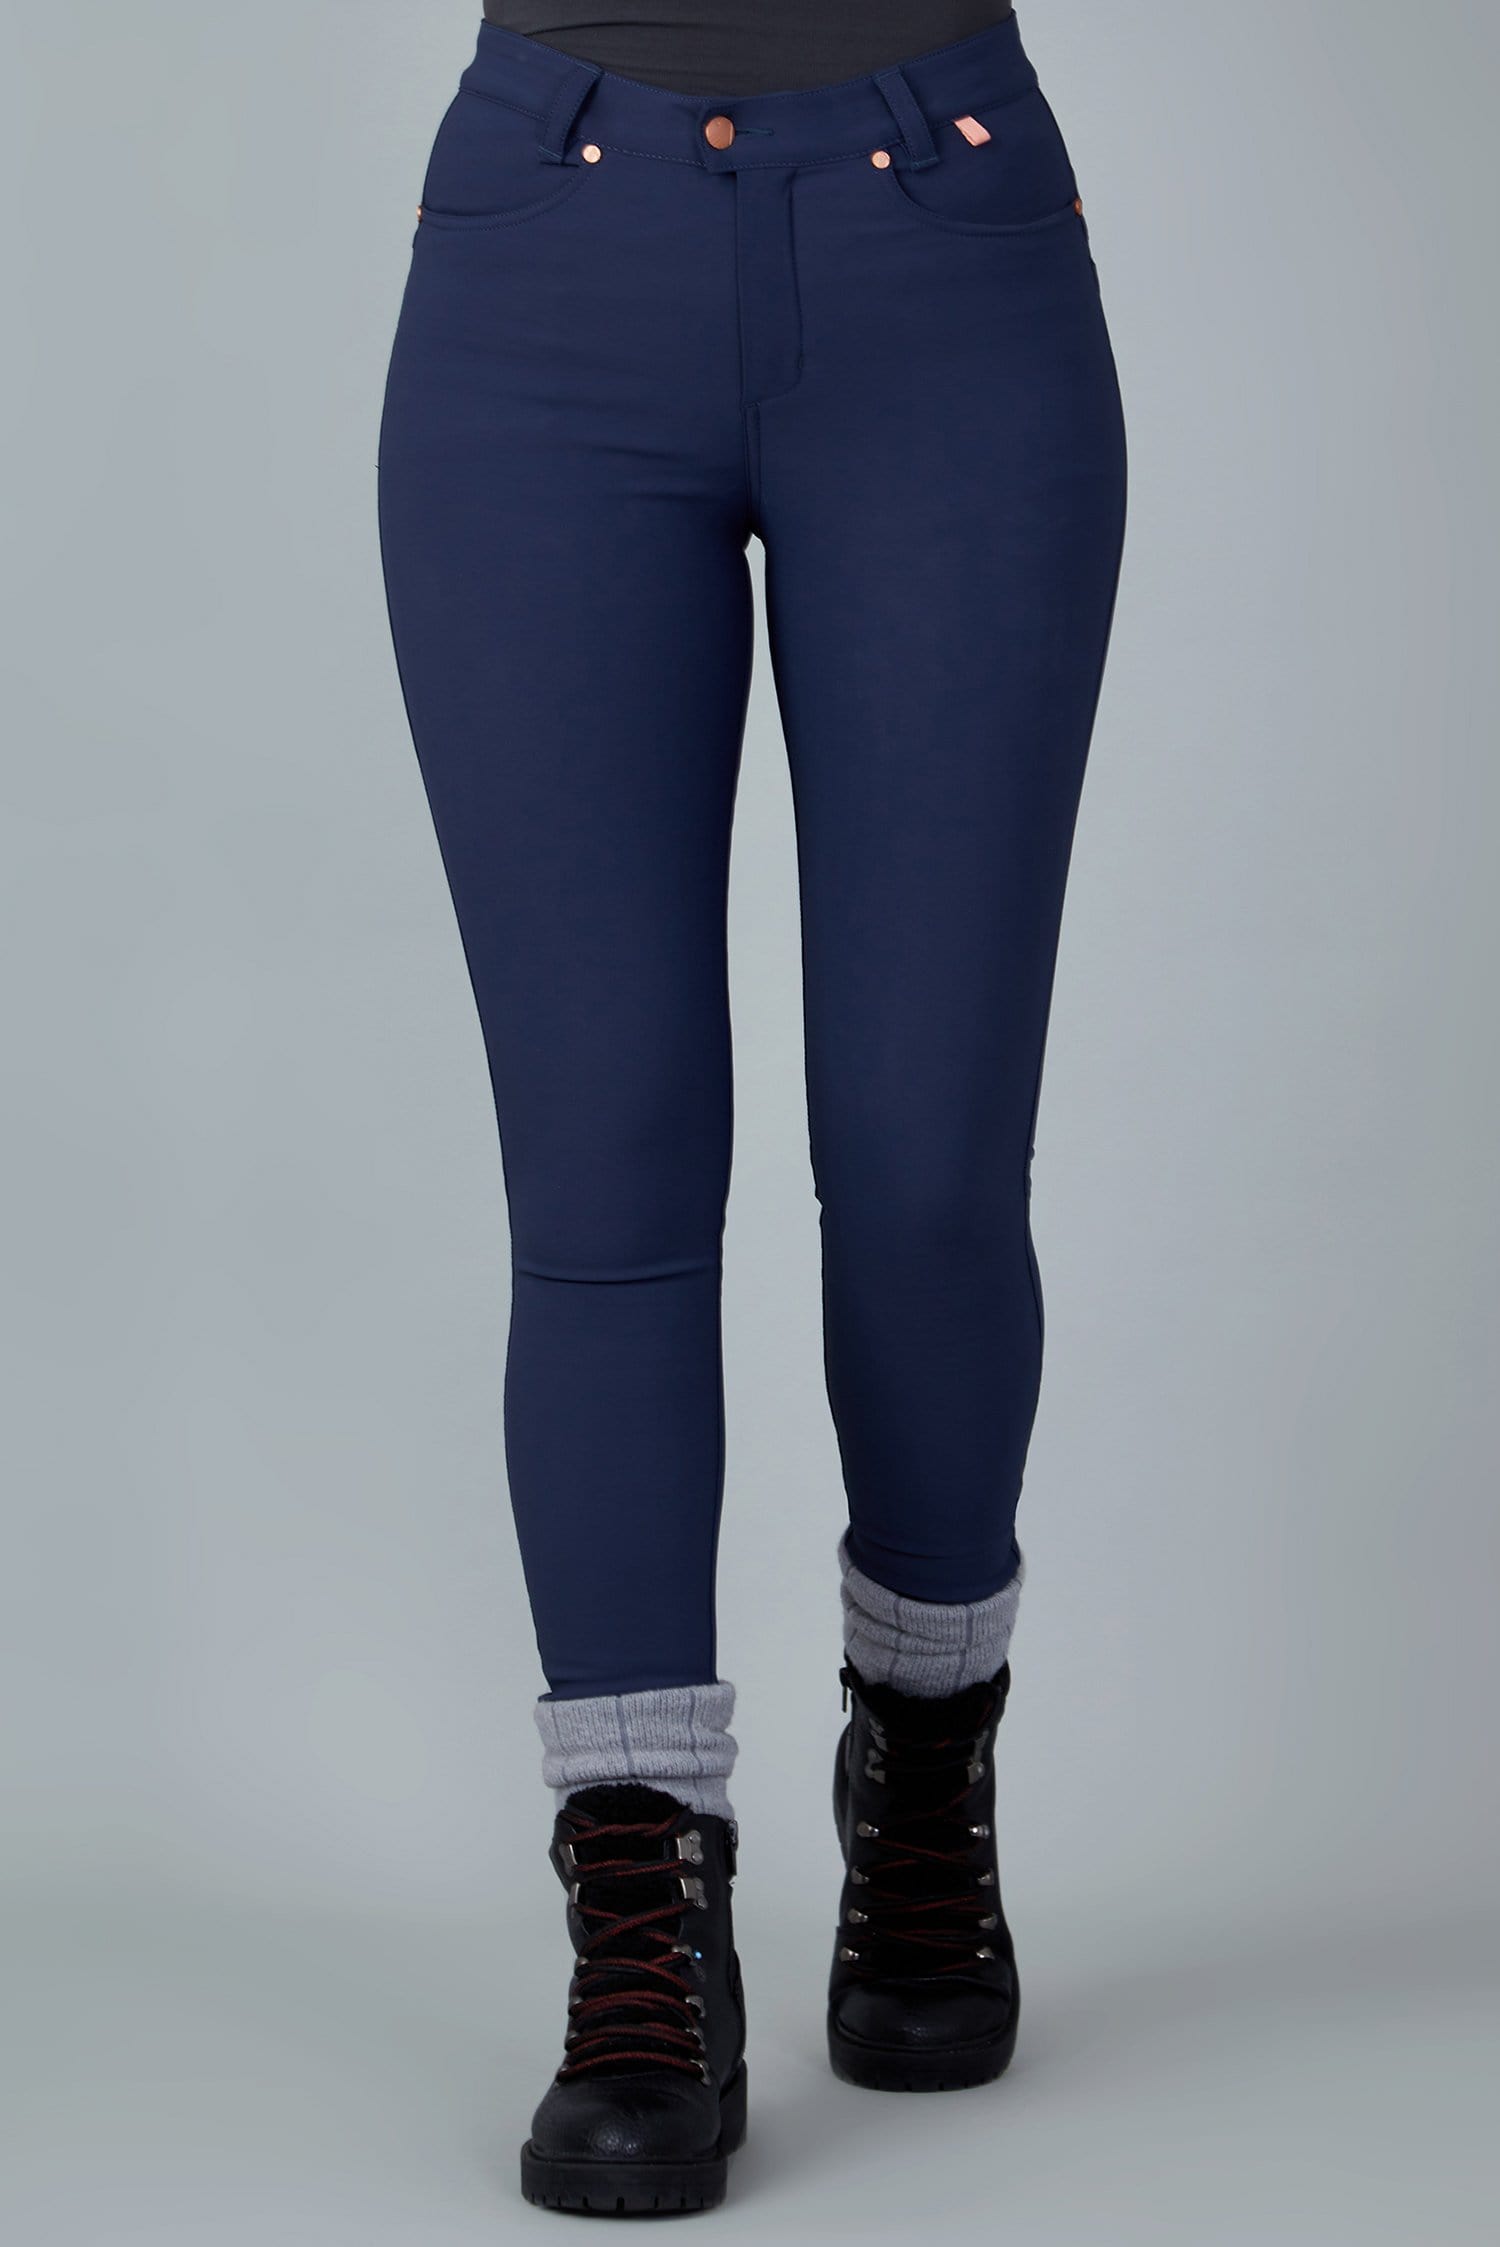 High-Abrasion Aventurite Trousers - Midnight Blue Trousers  